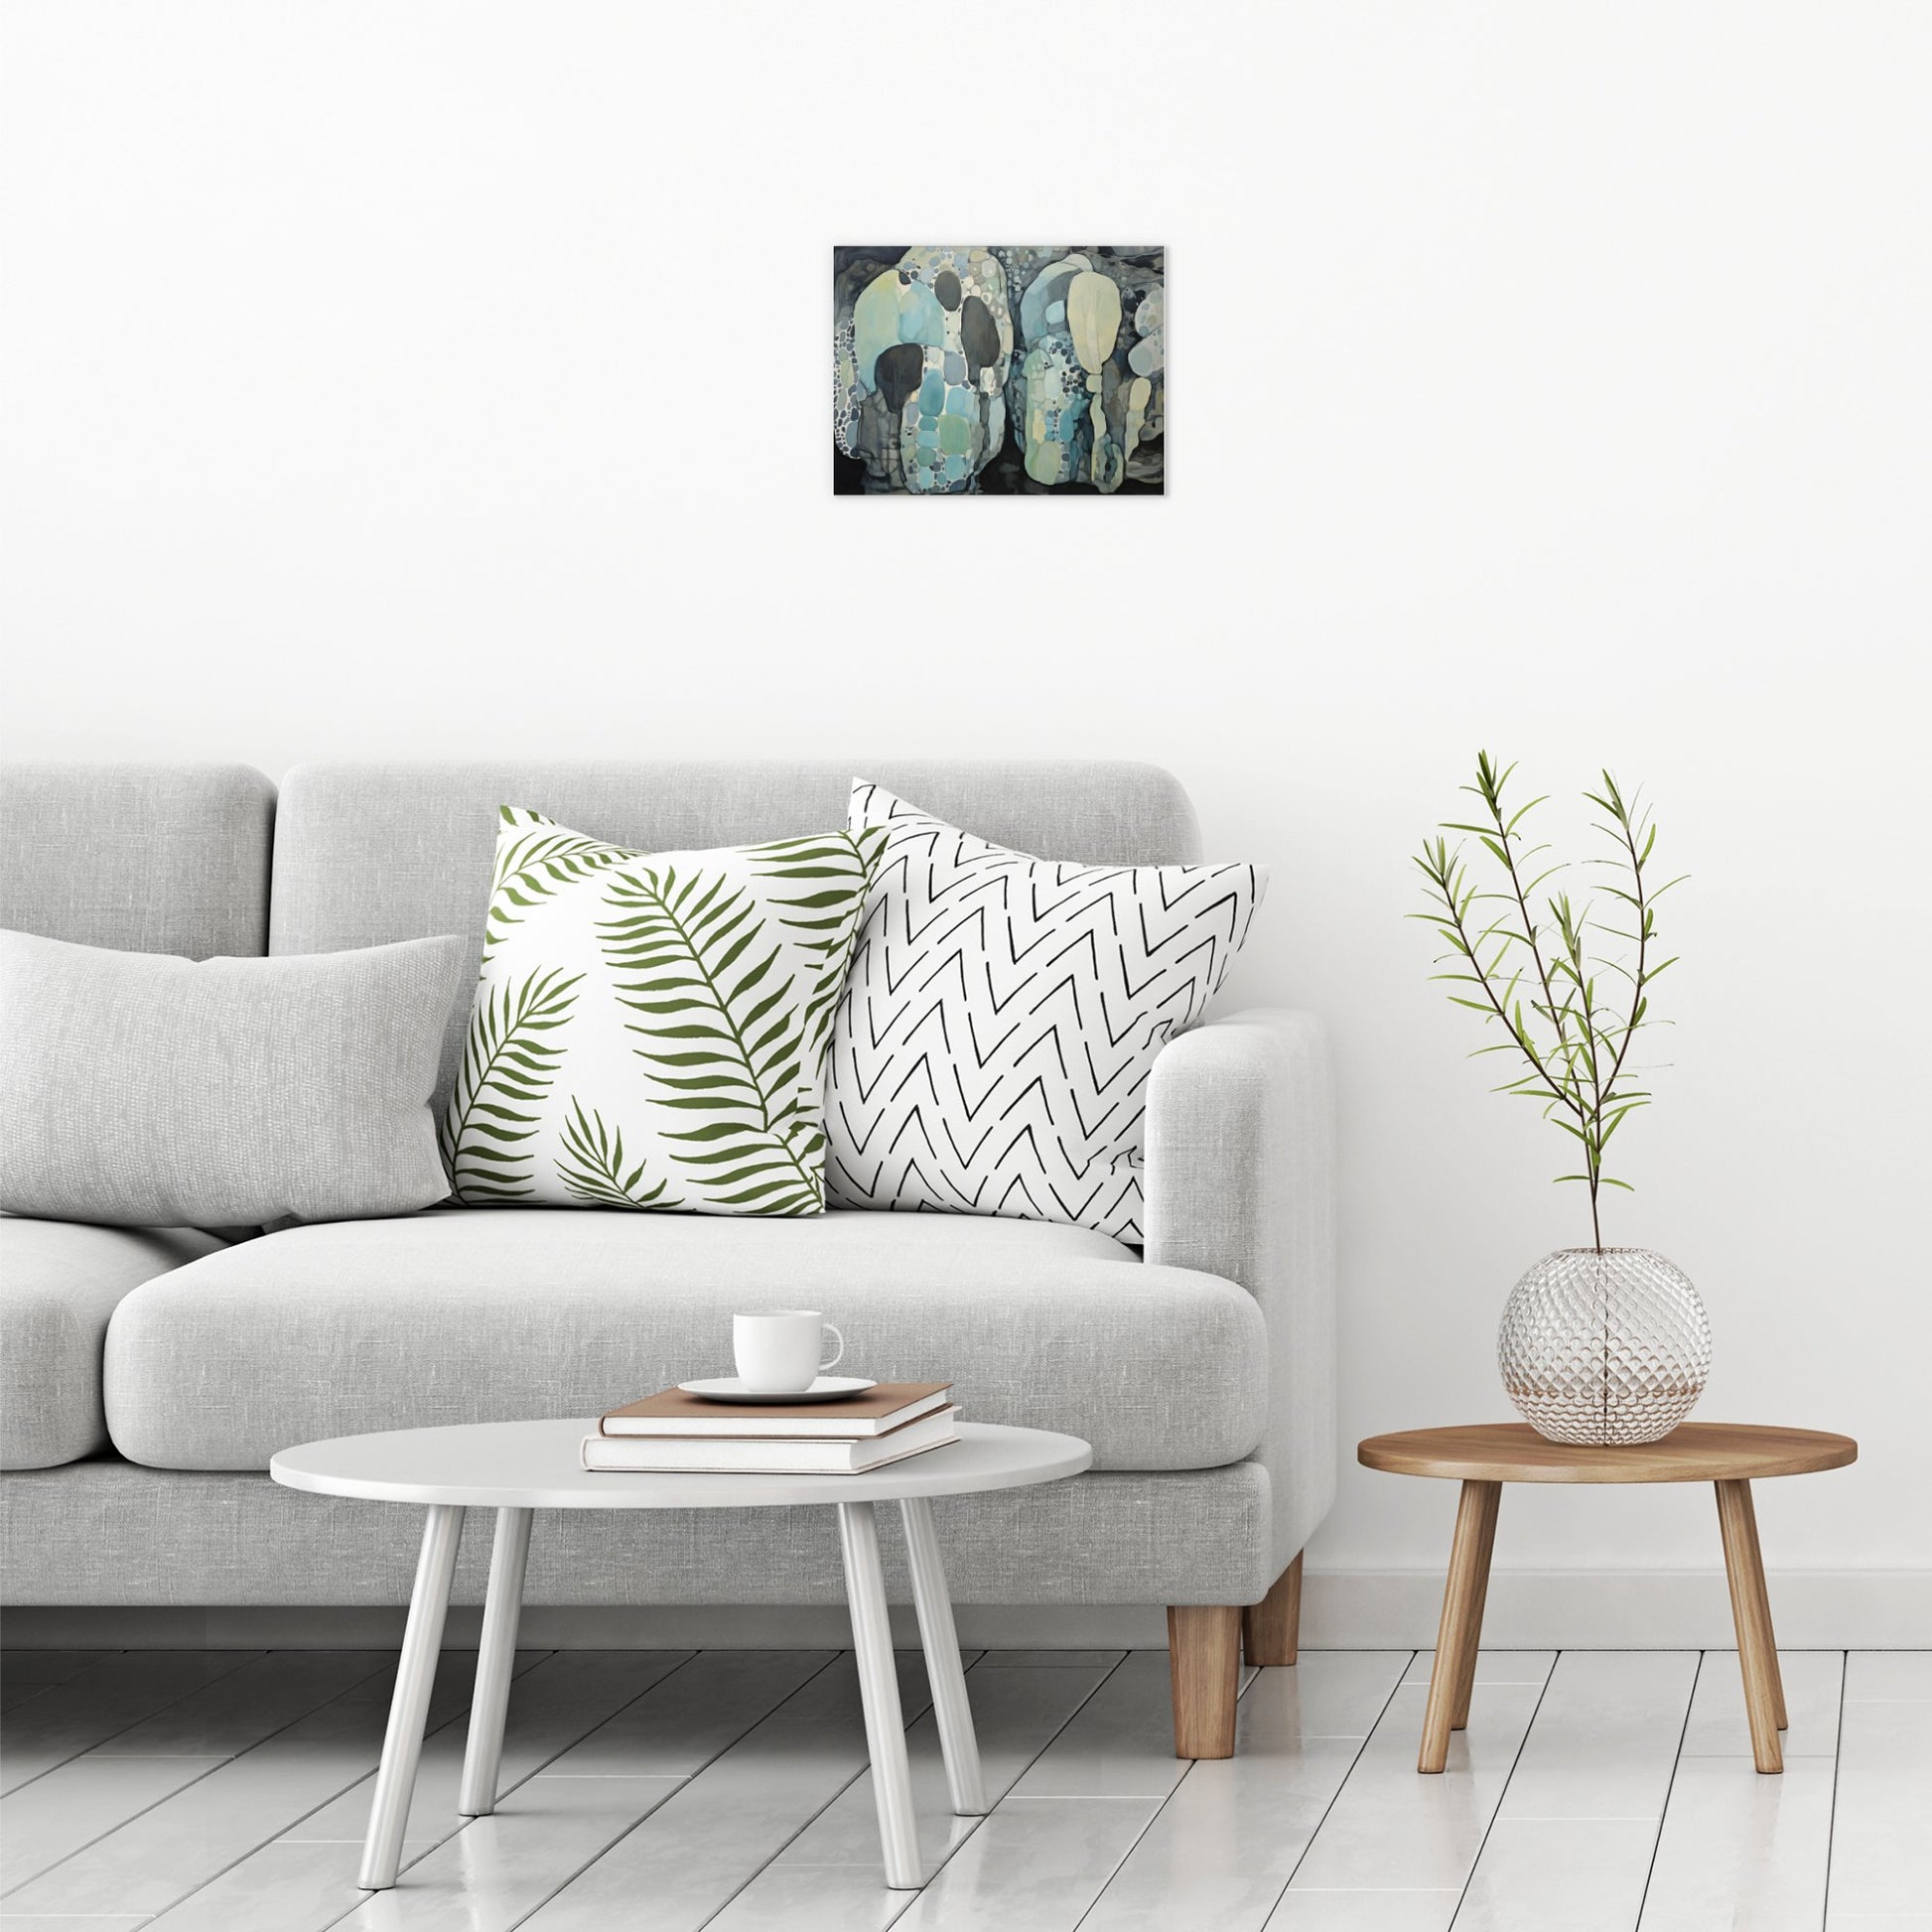 A contemporary modern room view showing a small size metal art poster display plate with printed design of a Blue Rocks Abstract Painting